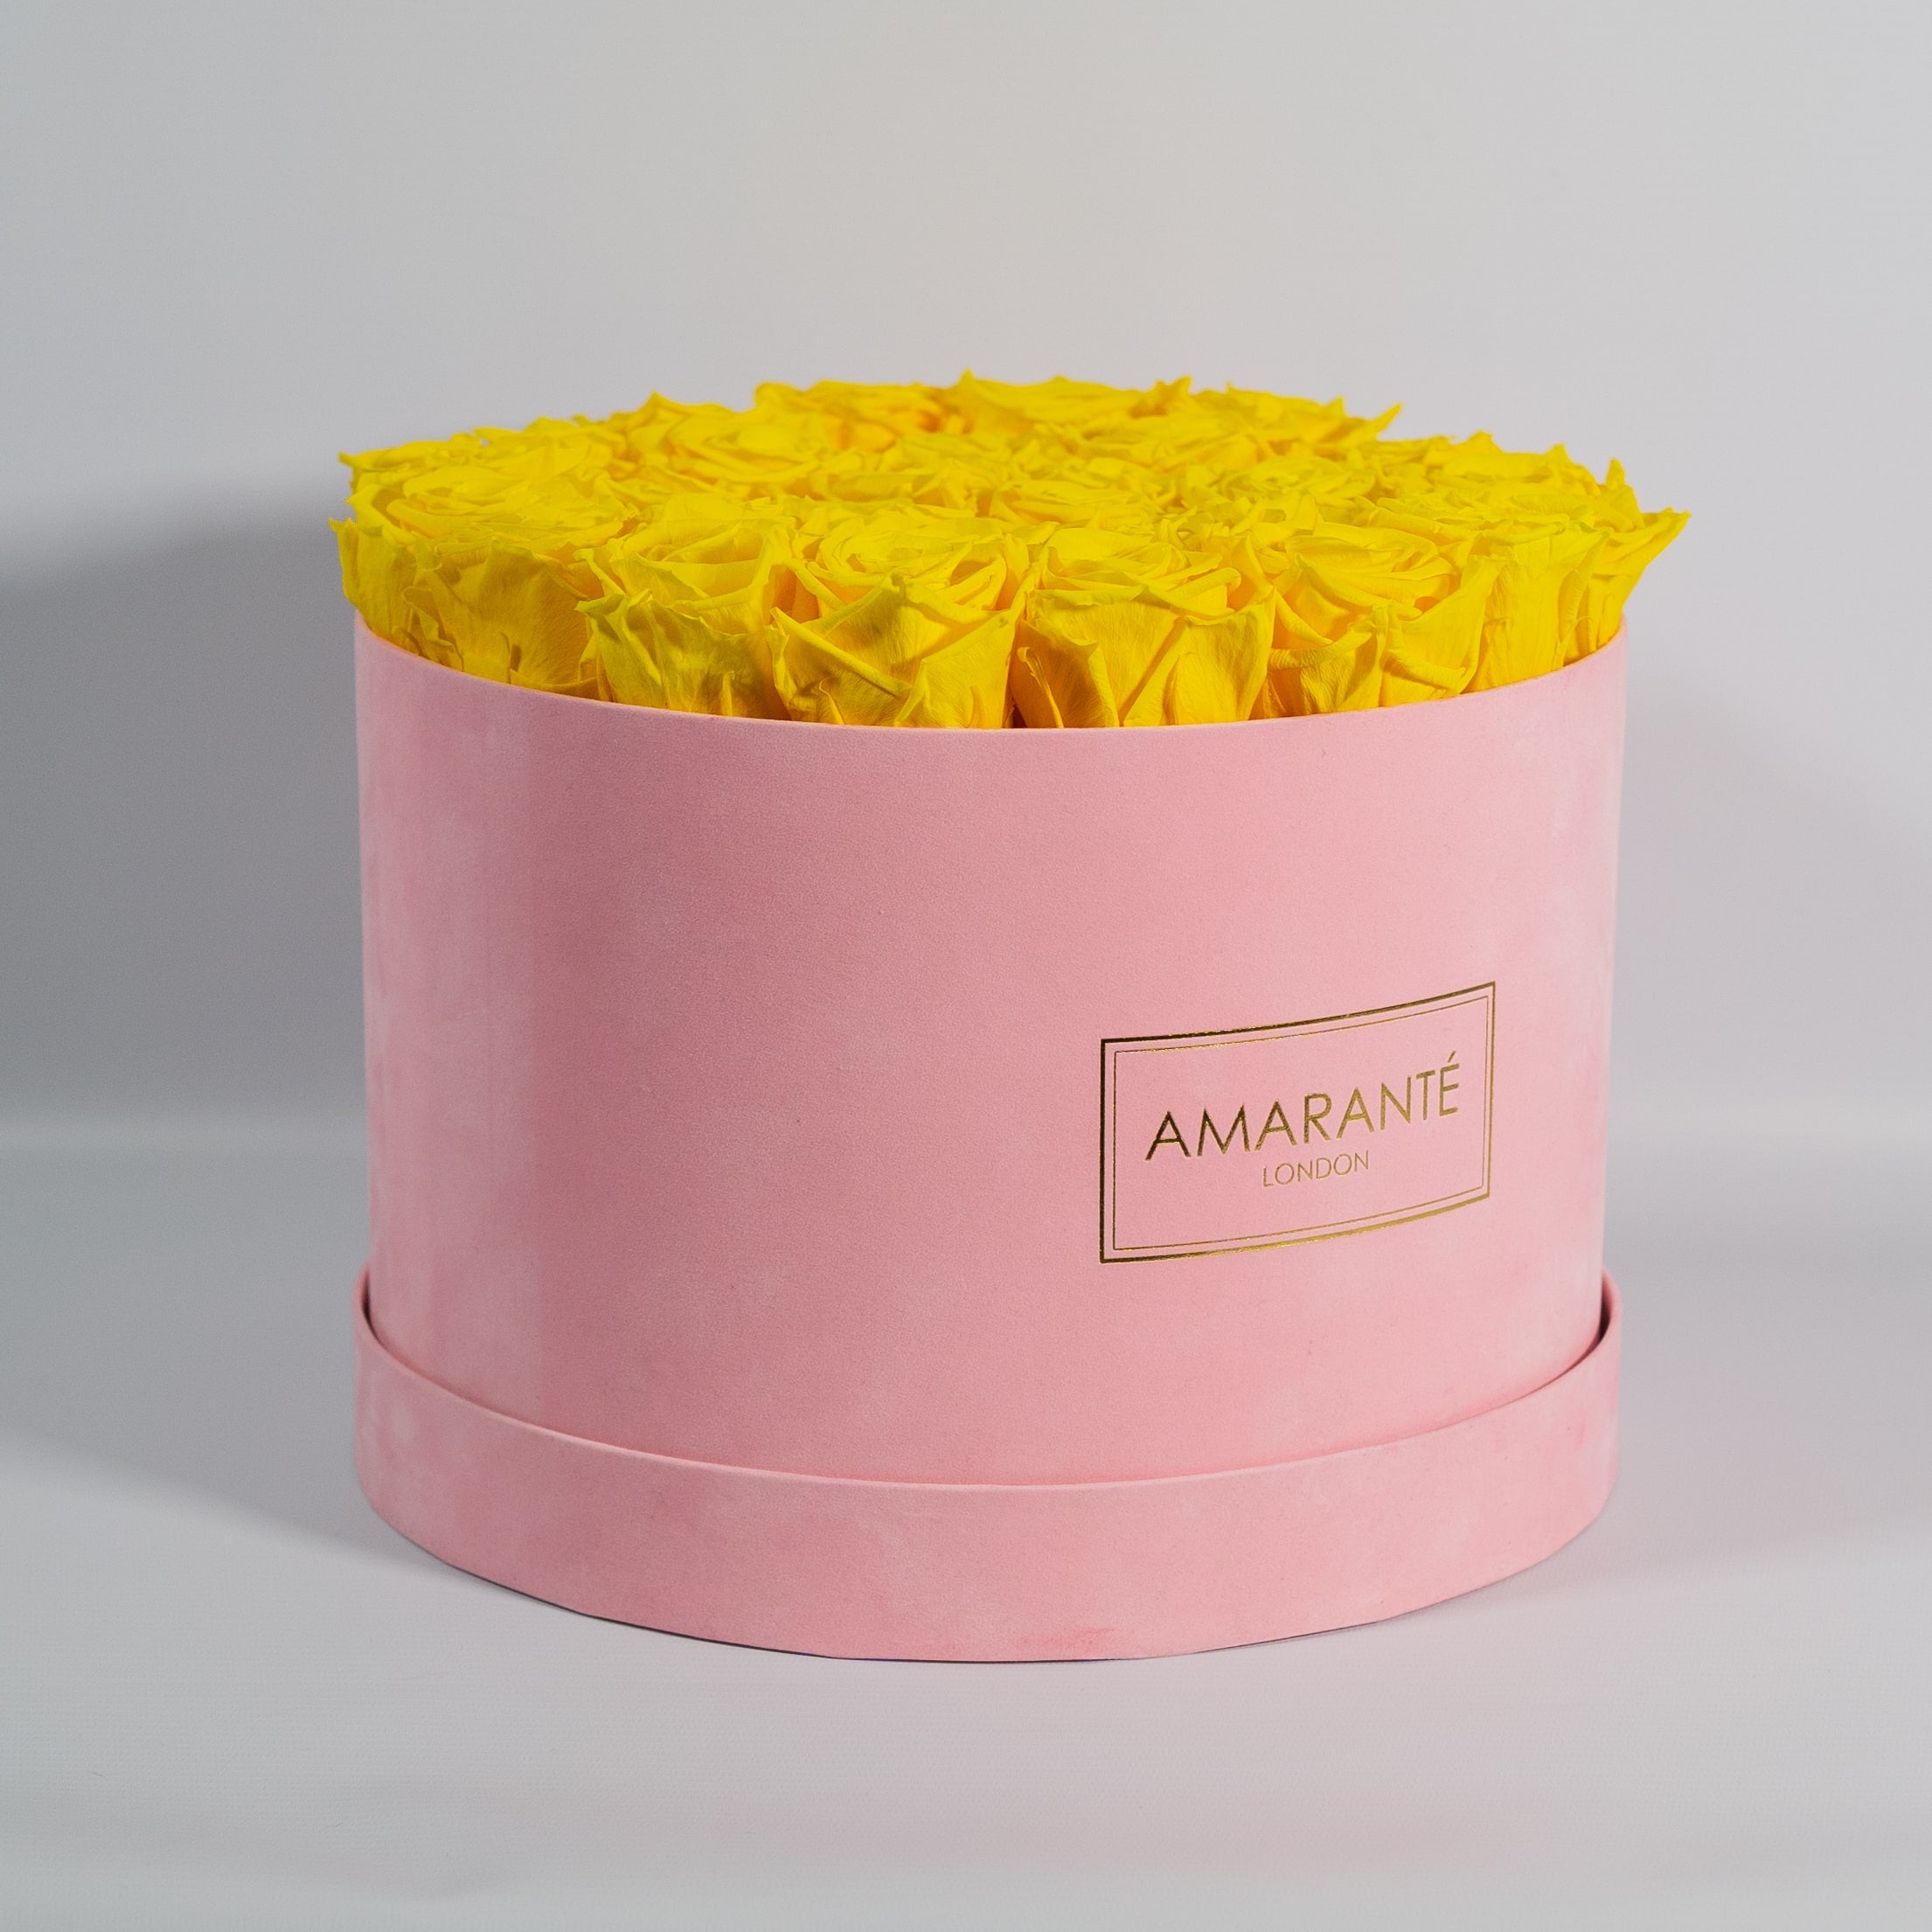 Delightful yellow Roses in a chic pink box 